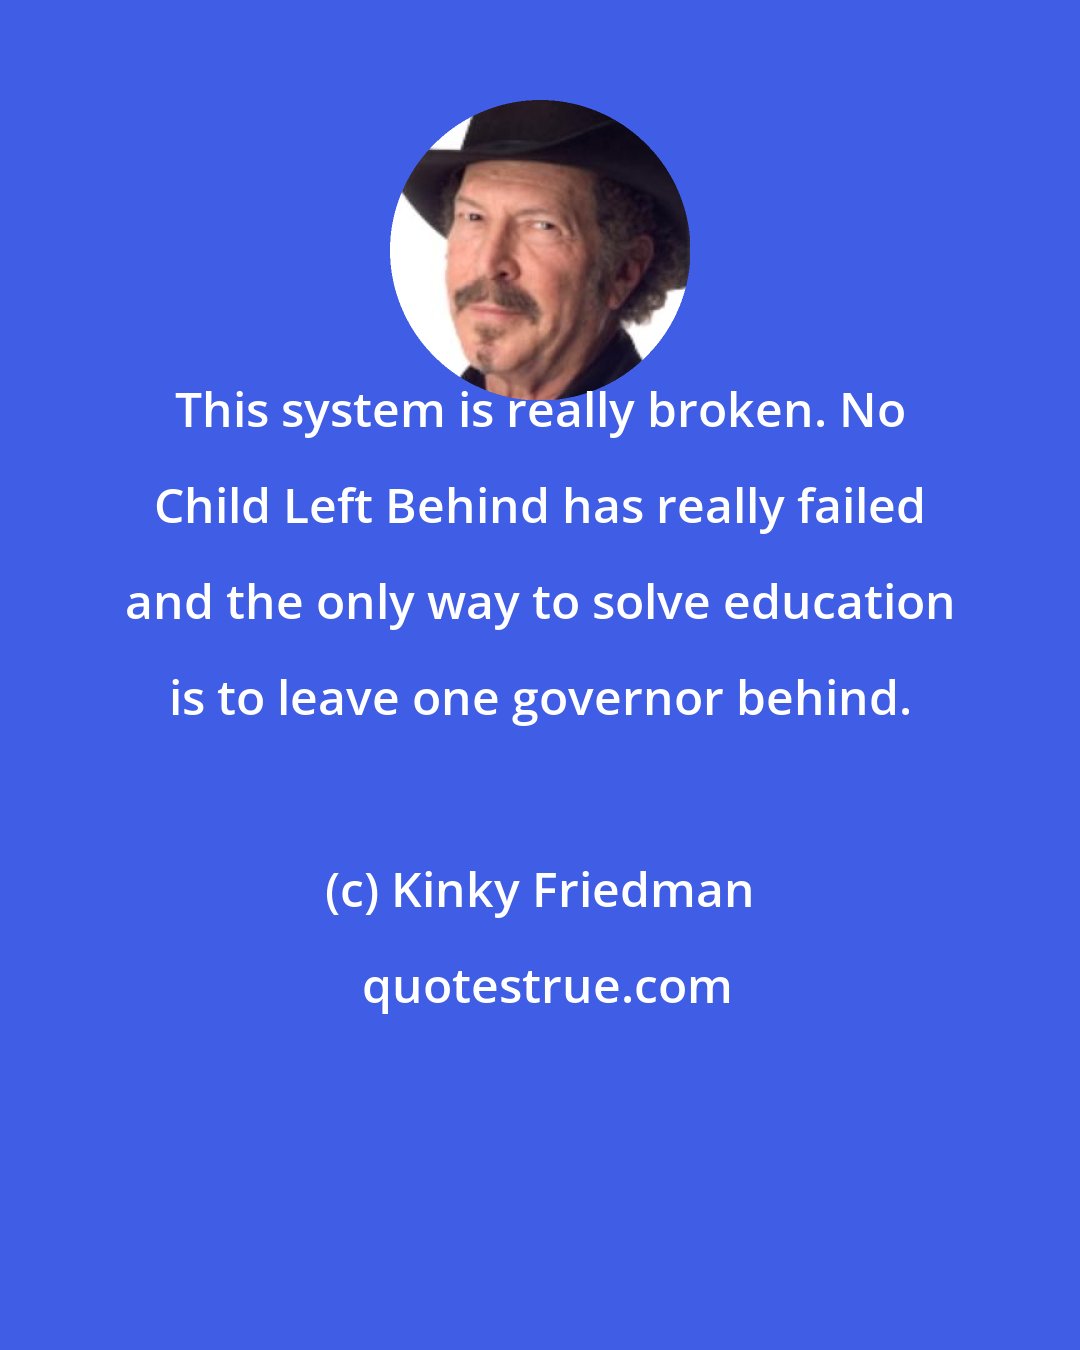 Kinky Friedman: This system is really broken. No Child Left Behind has really failed and the only way to solve education is to leave one governor behind.